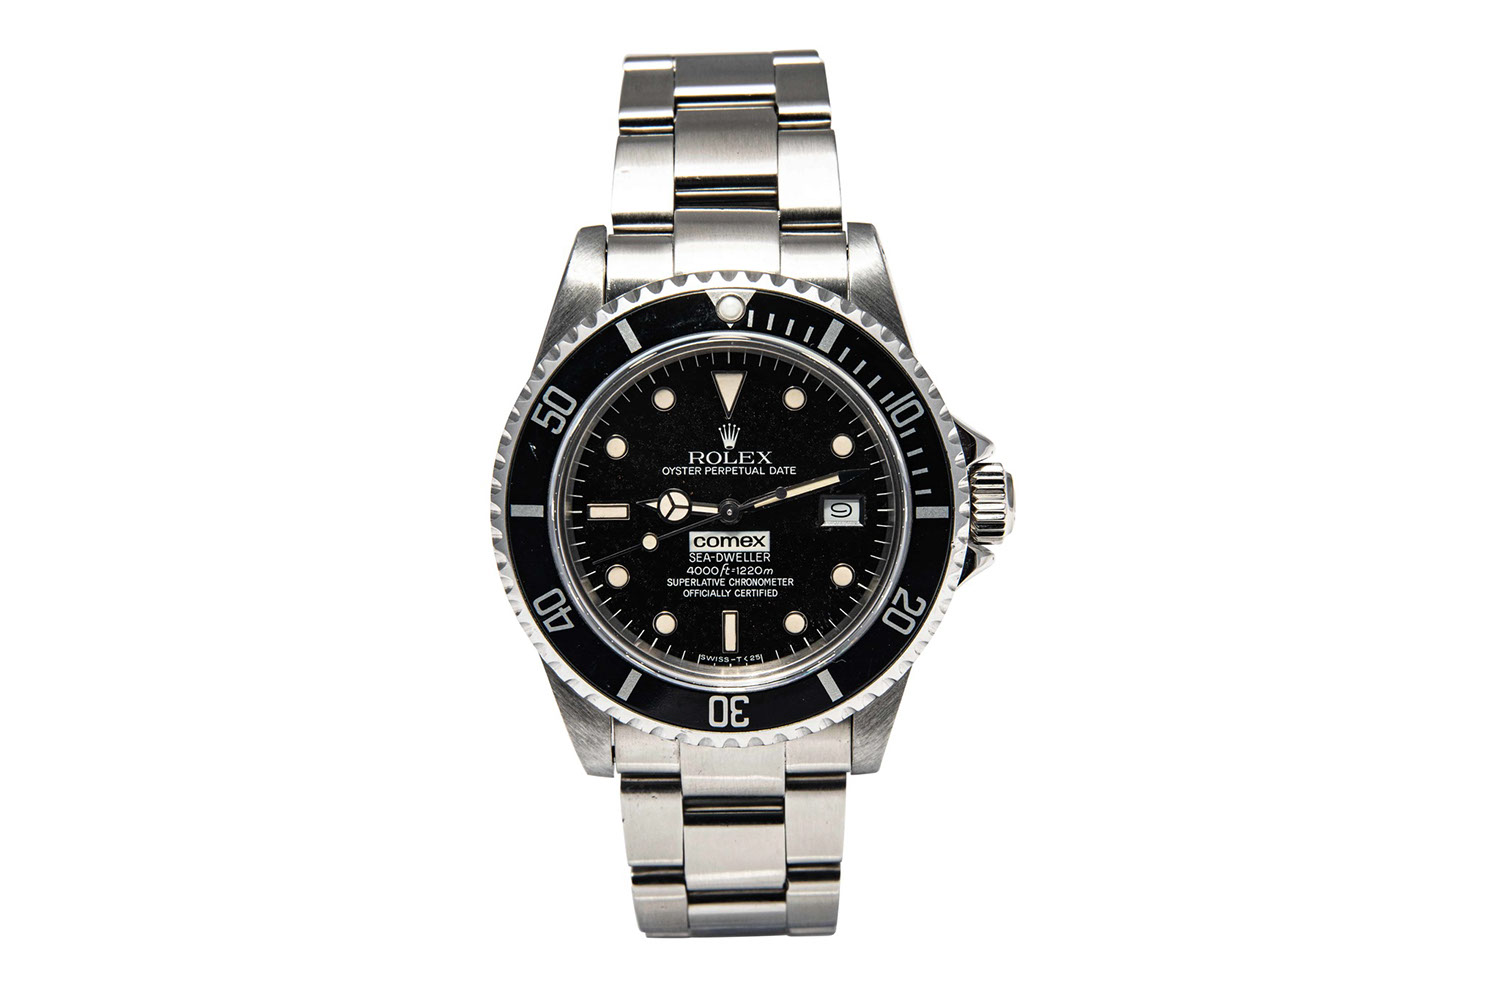 A full set Rolex Comex Sea-Dweller 16660 (gloss dial) that sold for $97k at Antiquorum’s March 2020 Private Sale